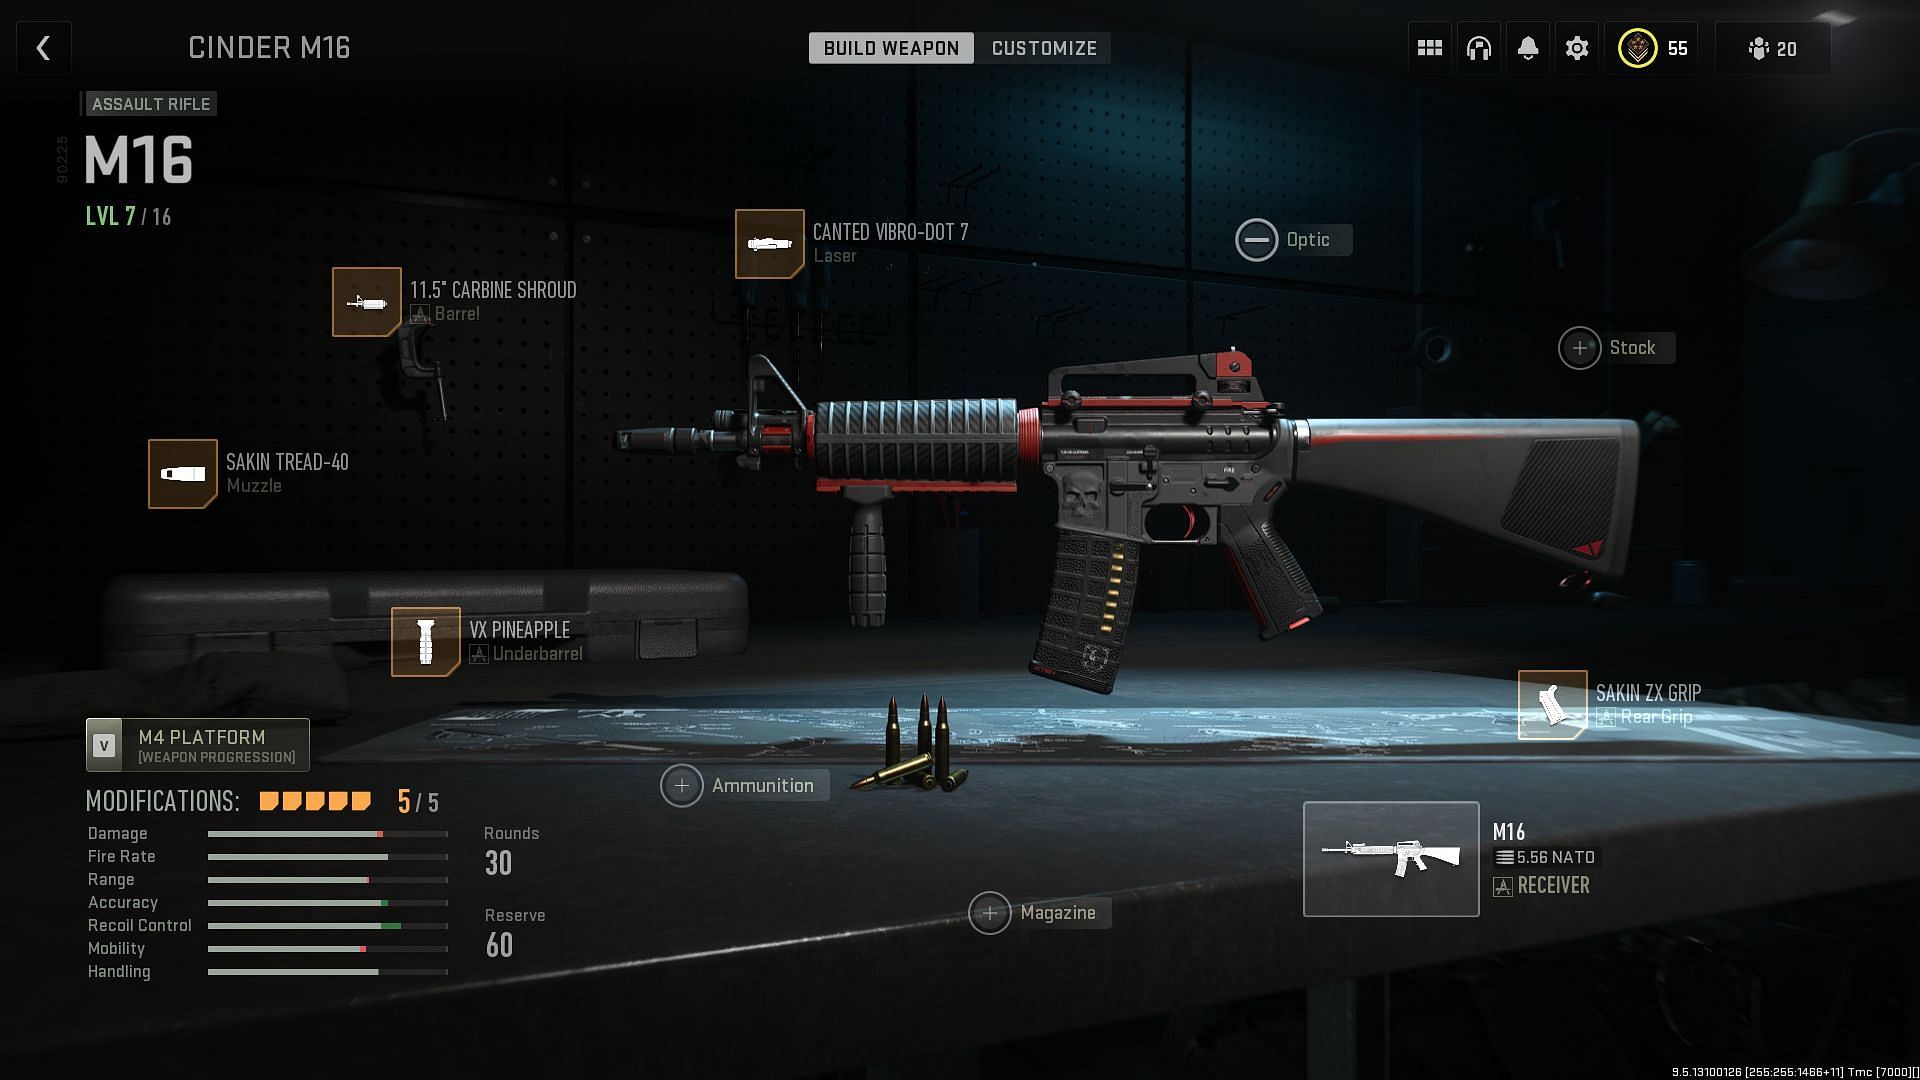 Attachments for M16 to achieve the lowest recoil (image via Activision)